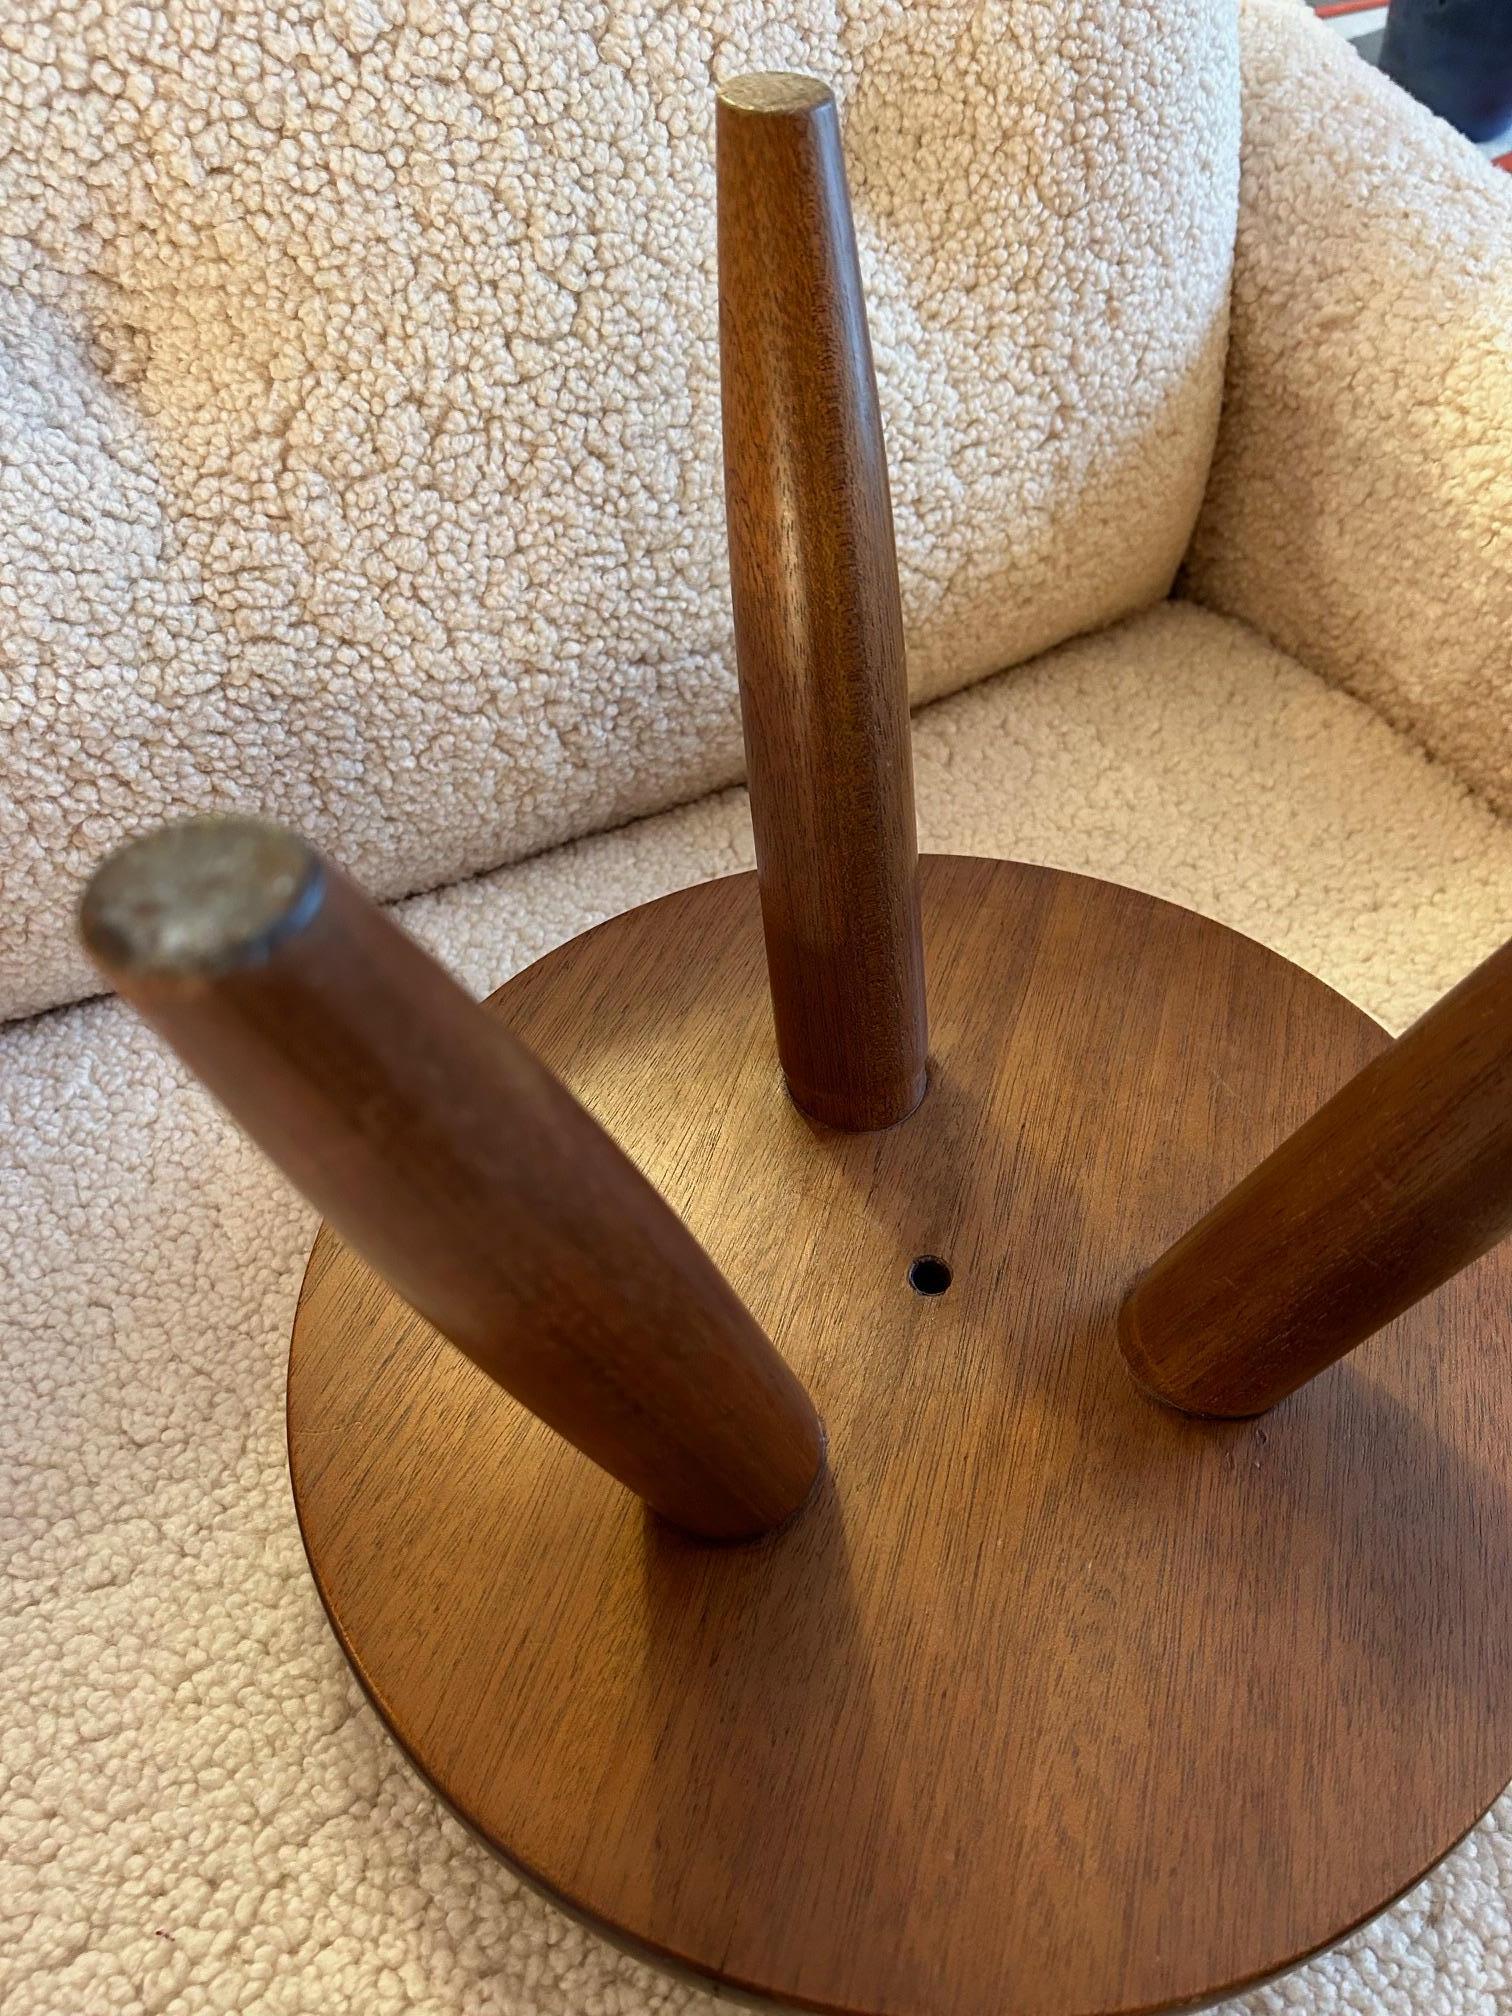 blond mahogany stool by Charlotte Perriand, produced between 1950 and 1960